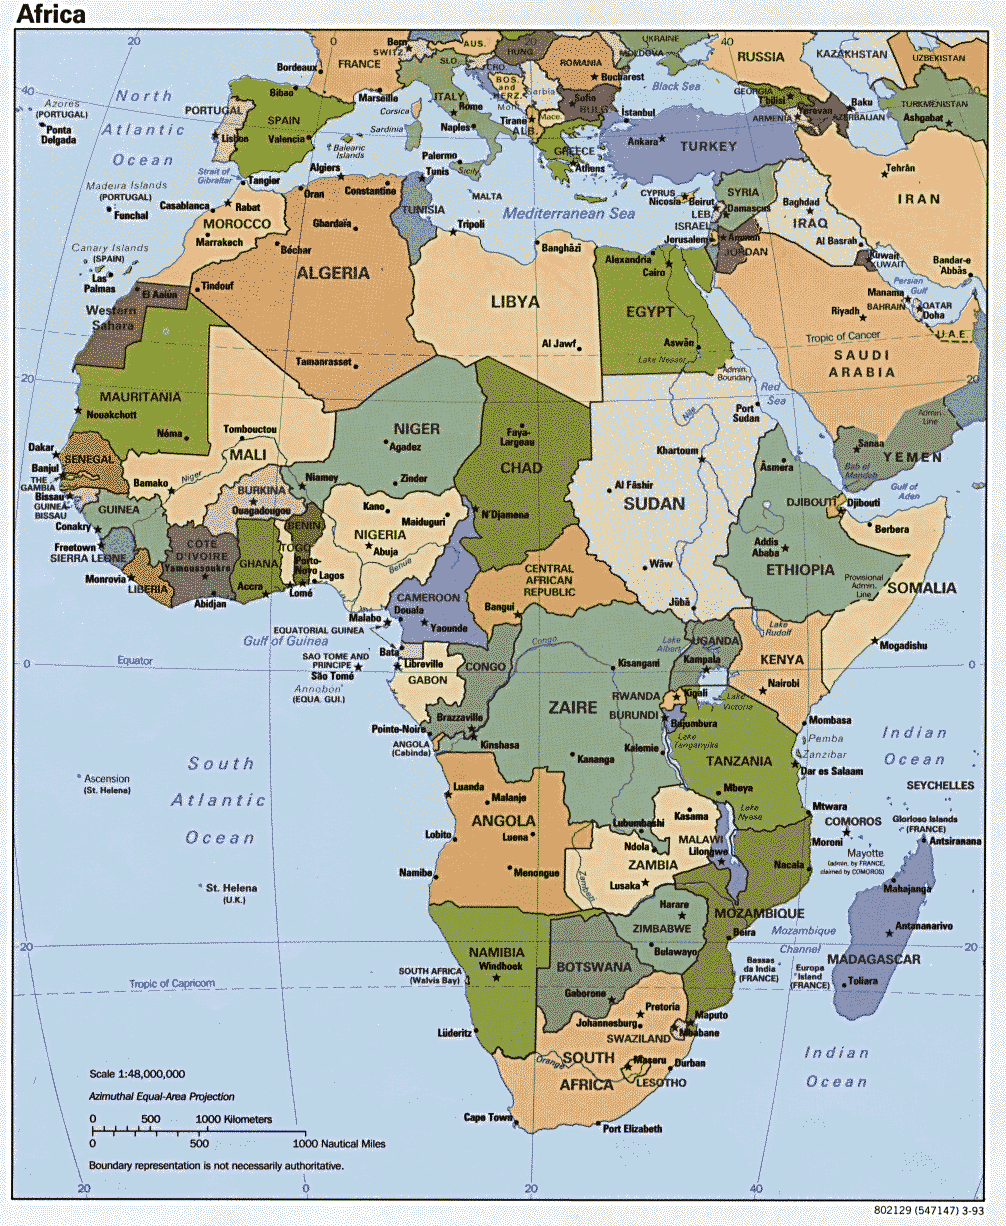 Africa - Other Maps